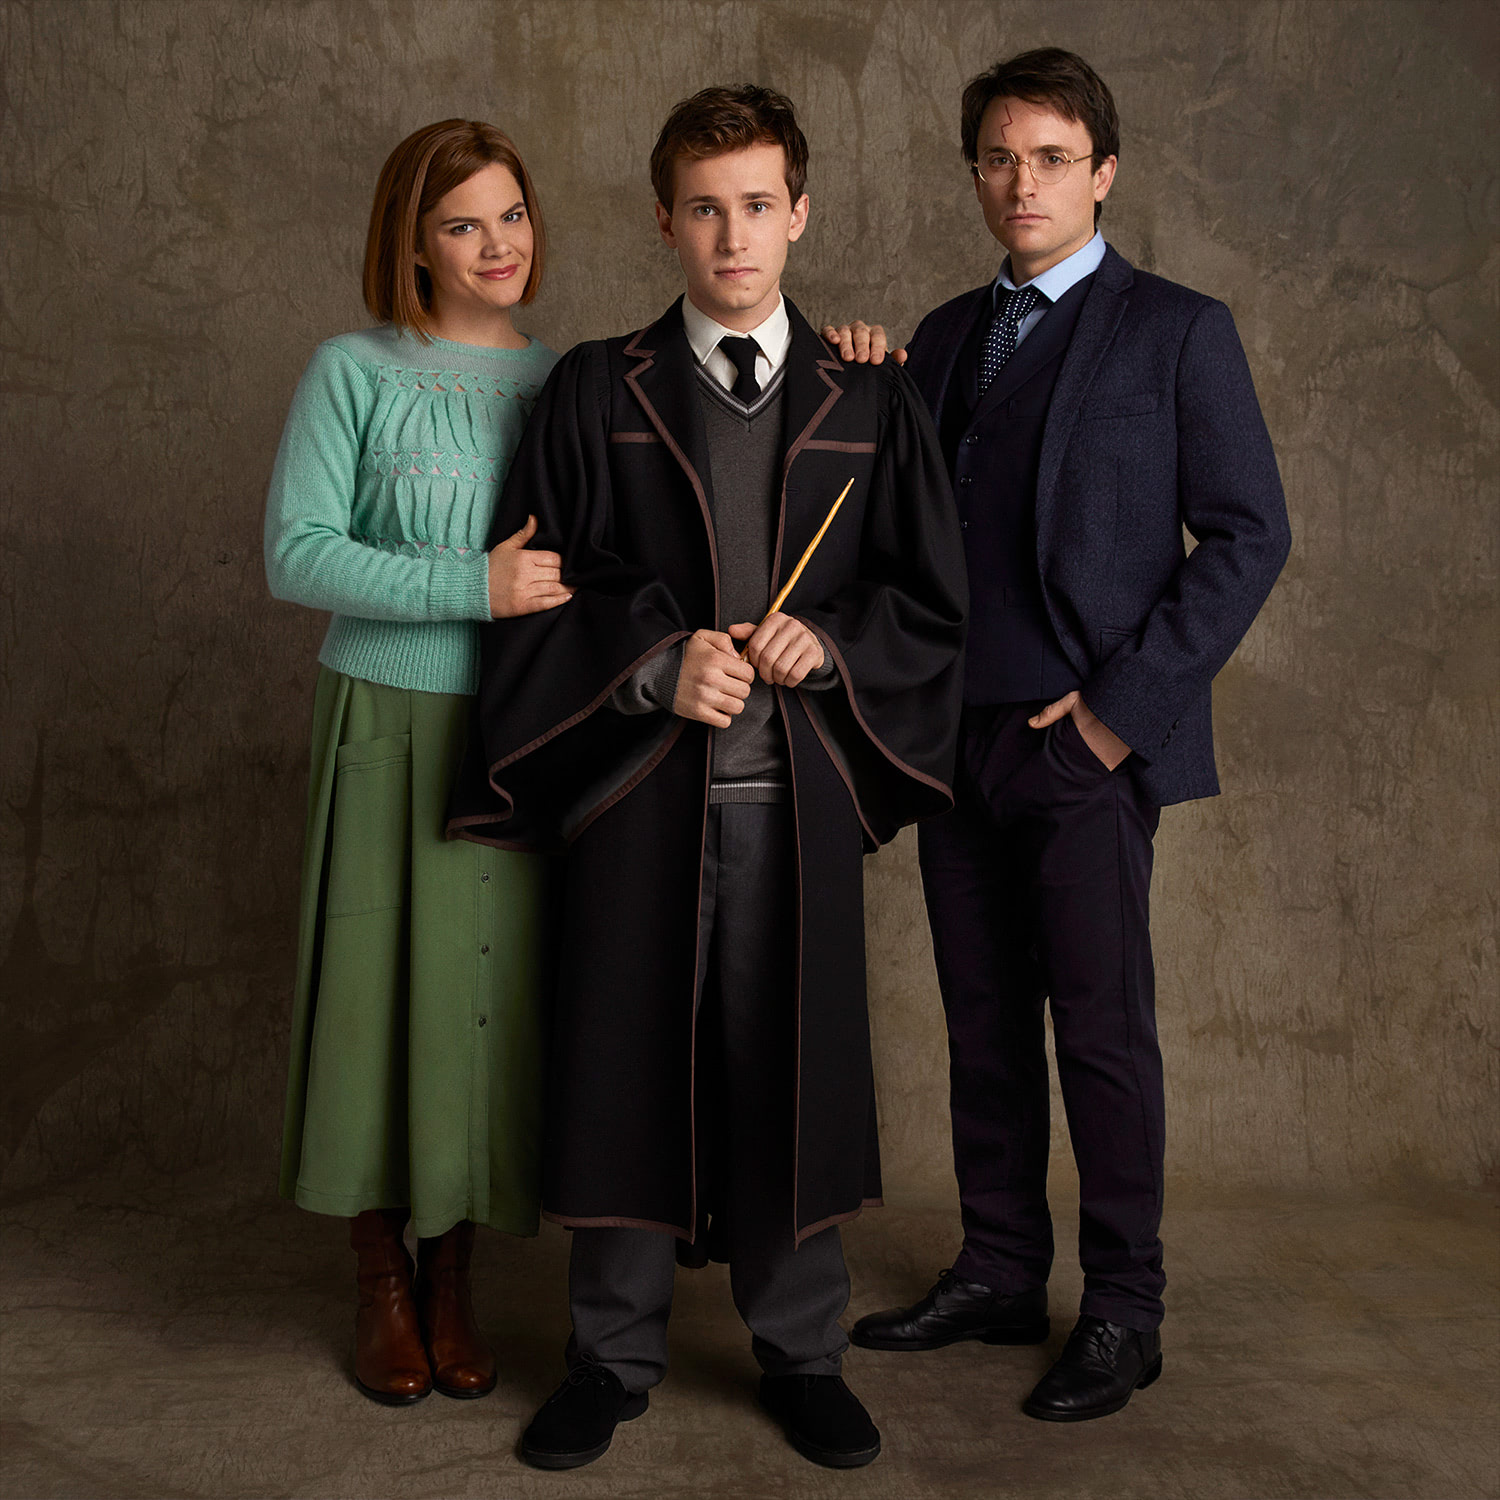 The Potter family